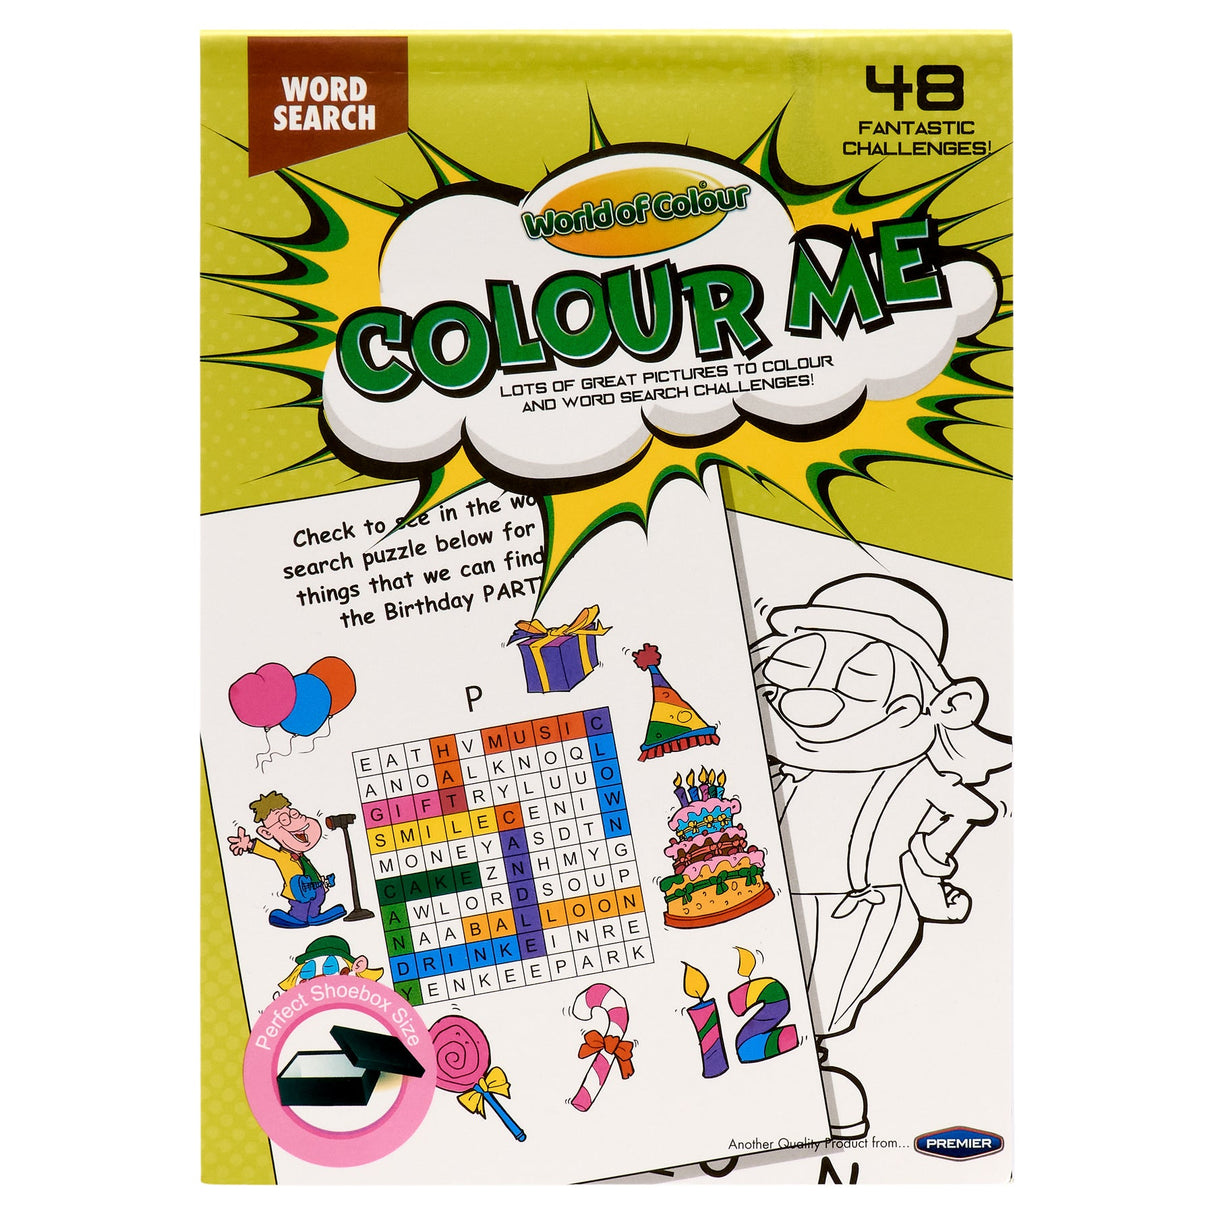 World of Colour A5 Word Search Colouring Book - 48 Pages | Stationery Shop UK